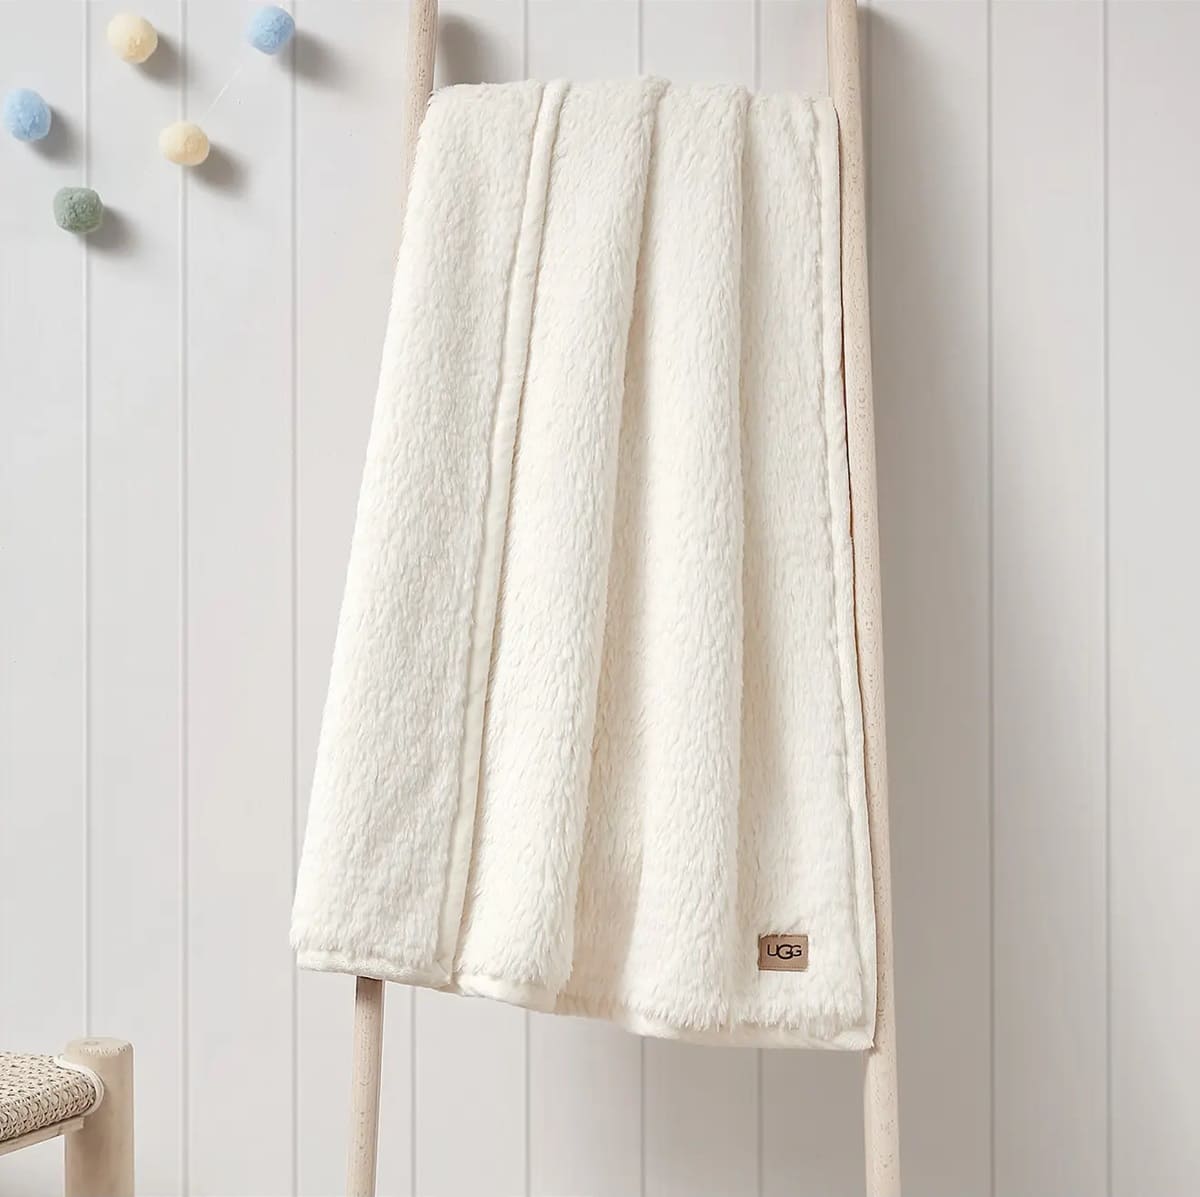 Most UGG blankets are made of a durable microfiber fabric that can be machine washed on a gentle cycle with cold water